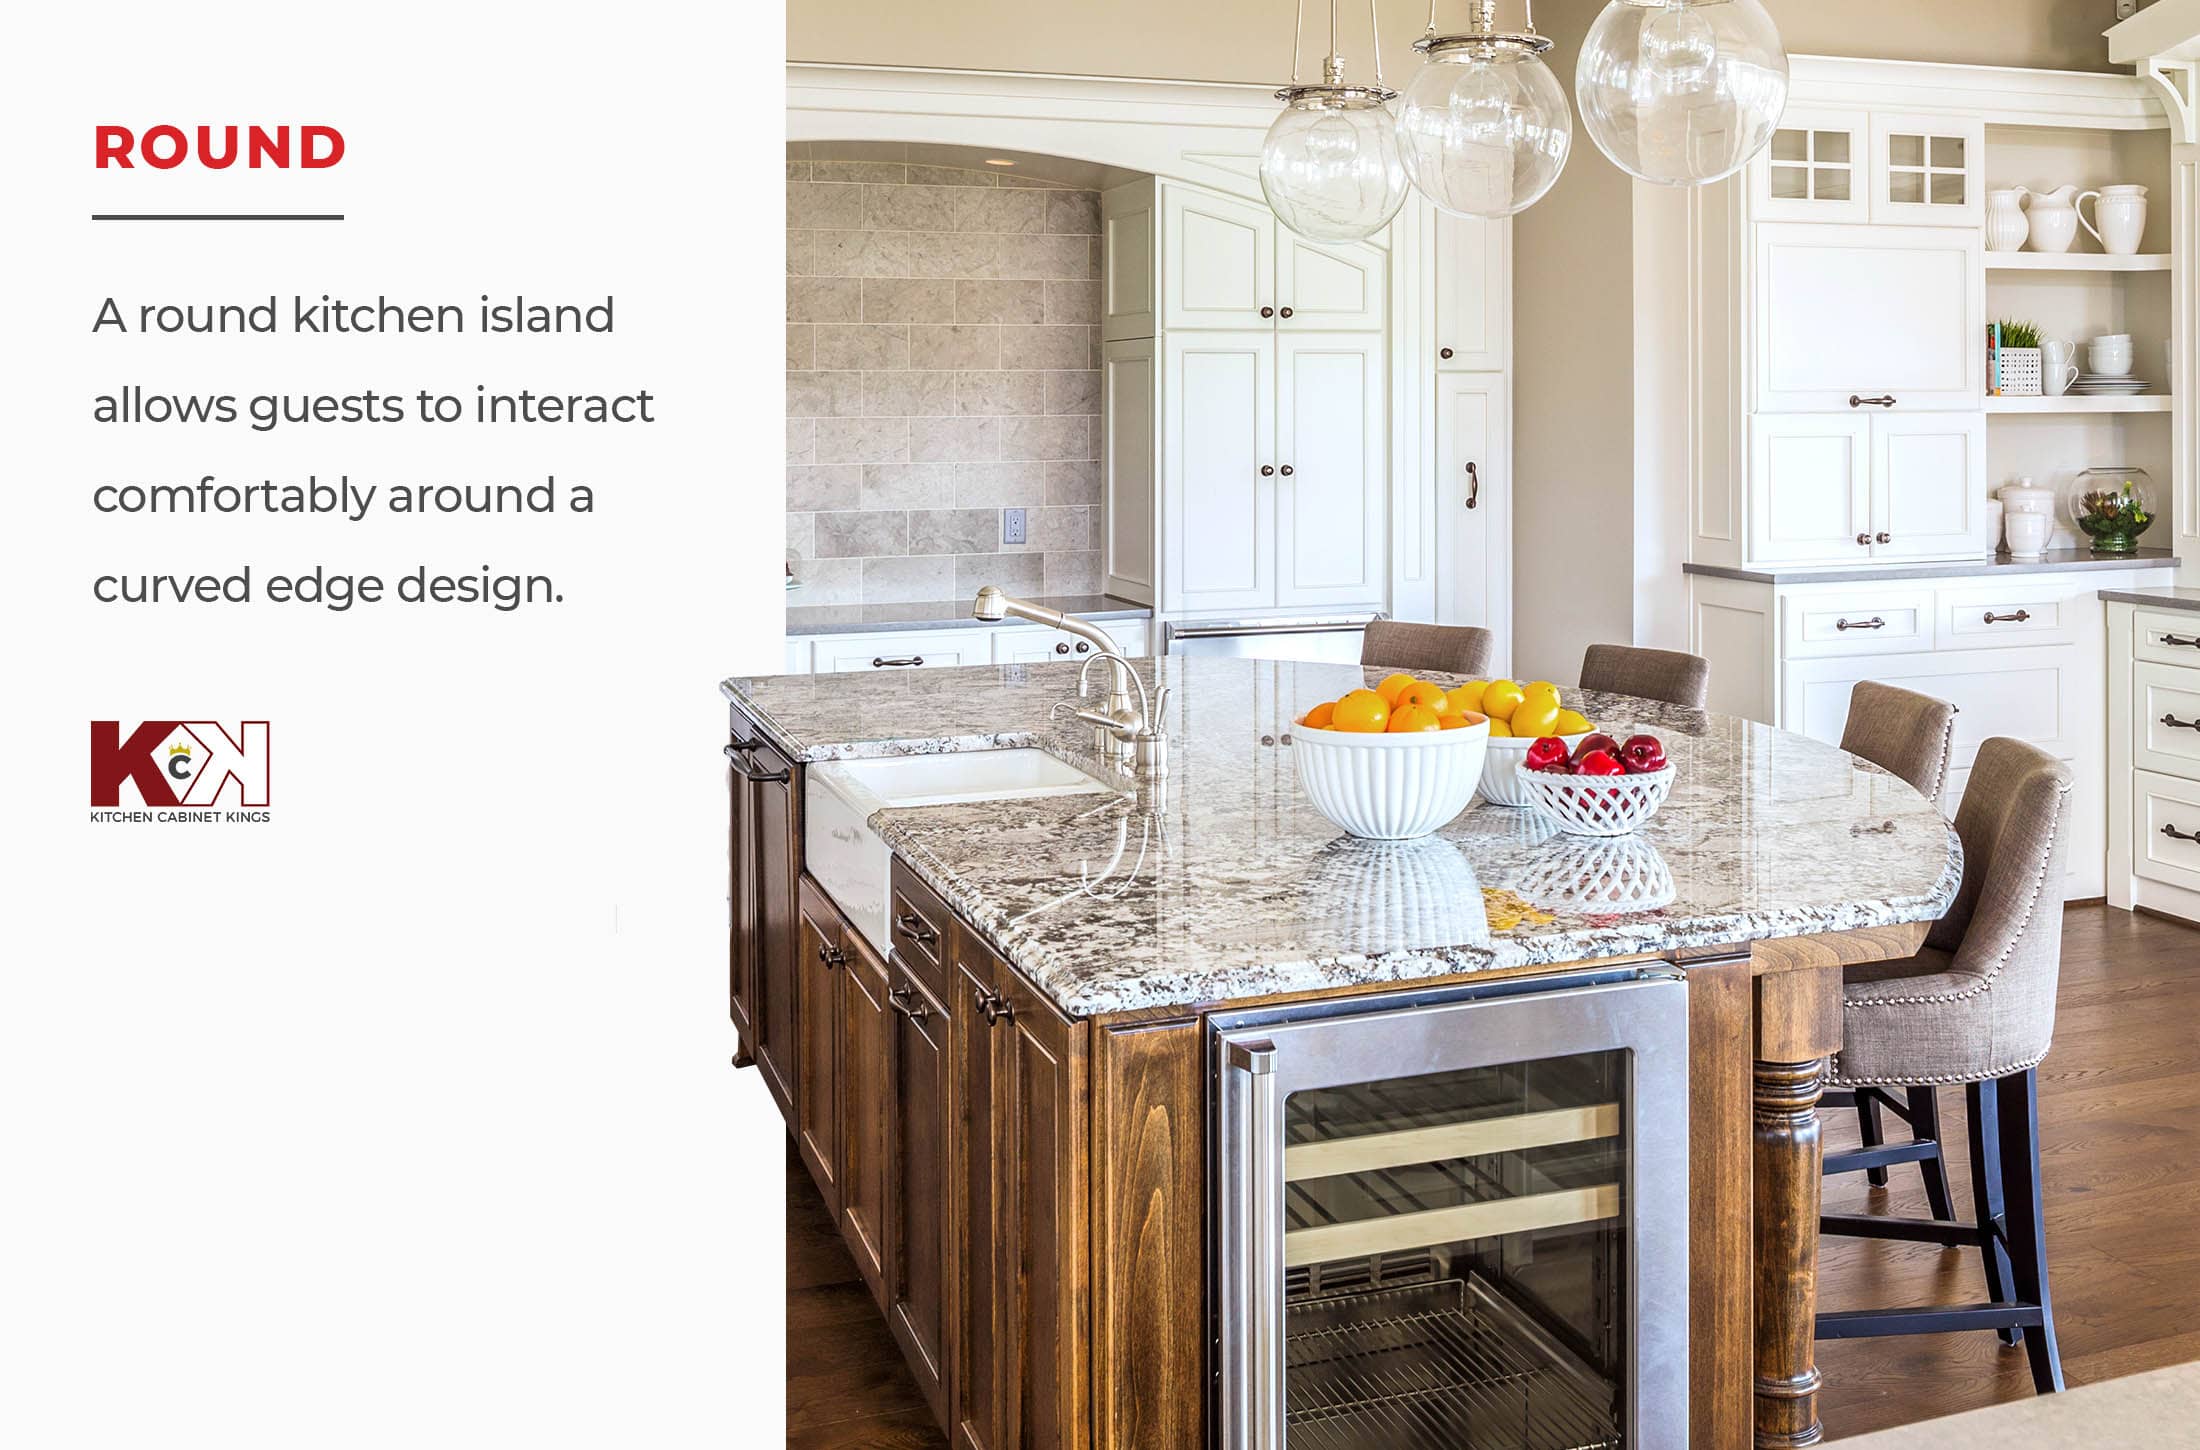 Image of round kitchen island with definition.